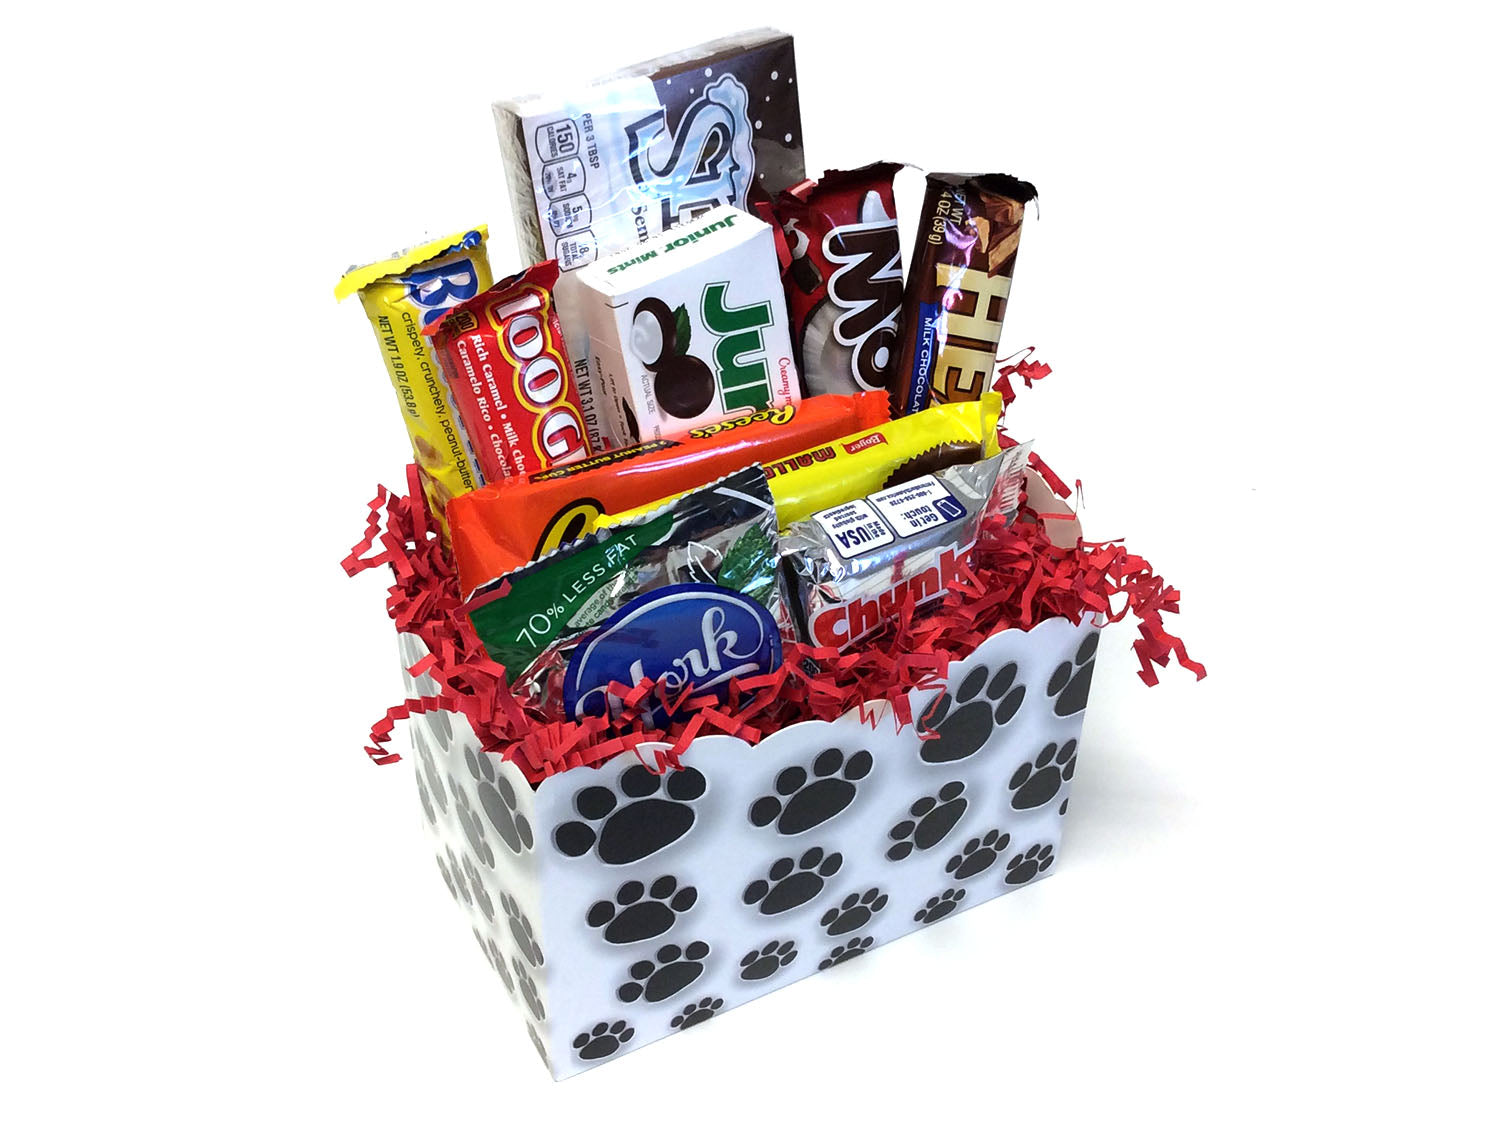 Chocolate Lovers Gift Box - Paw Prints (unwrapped)